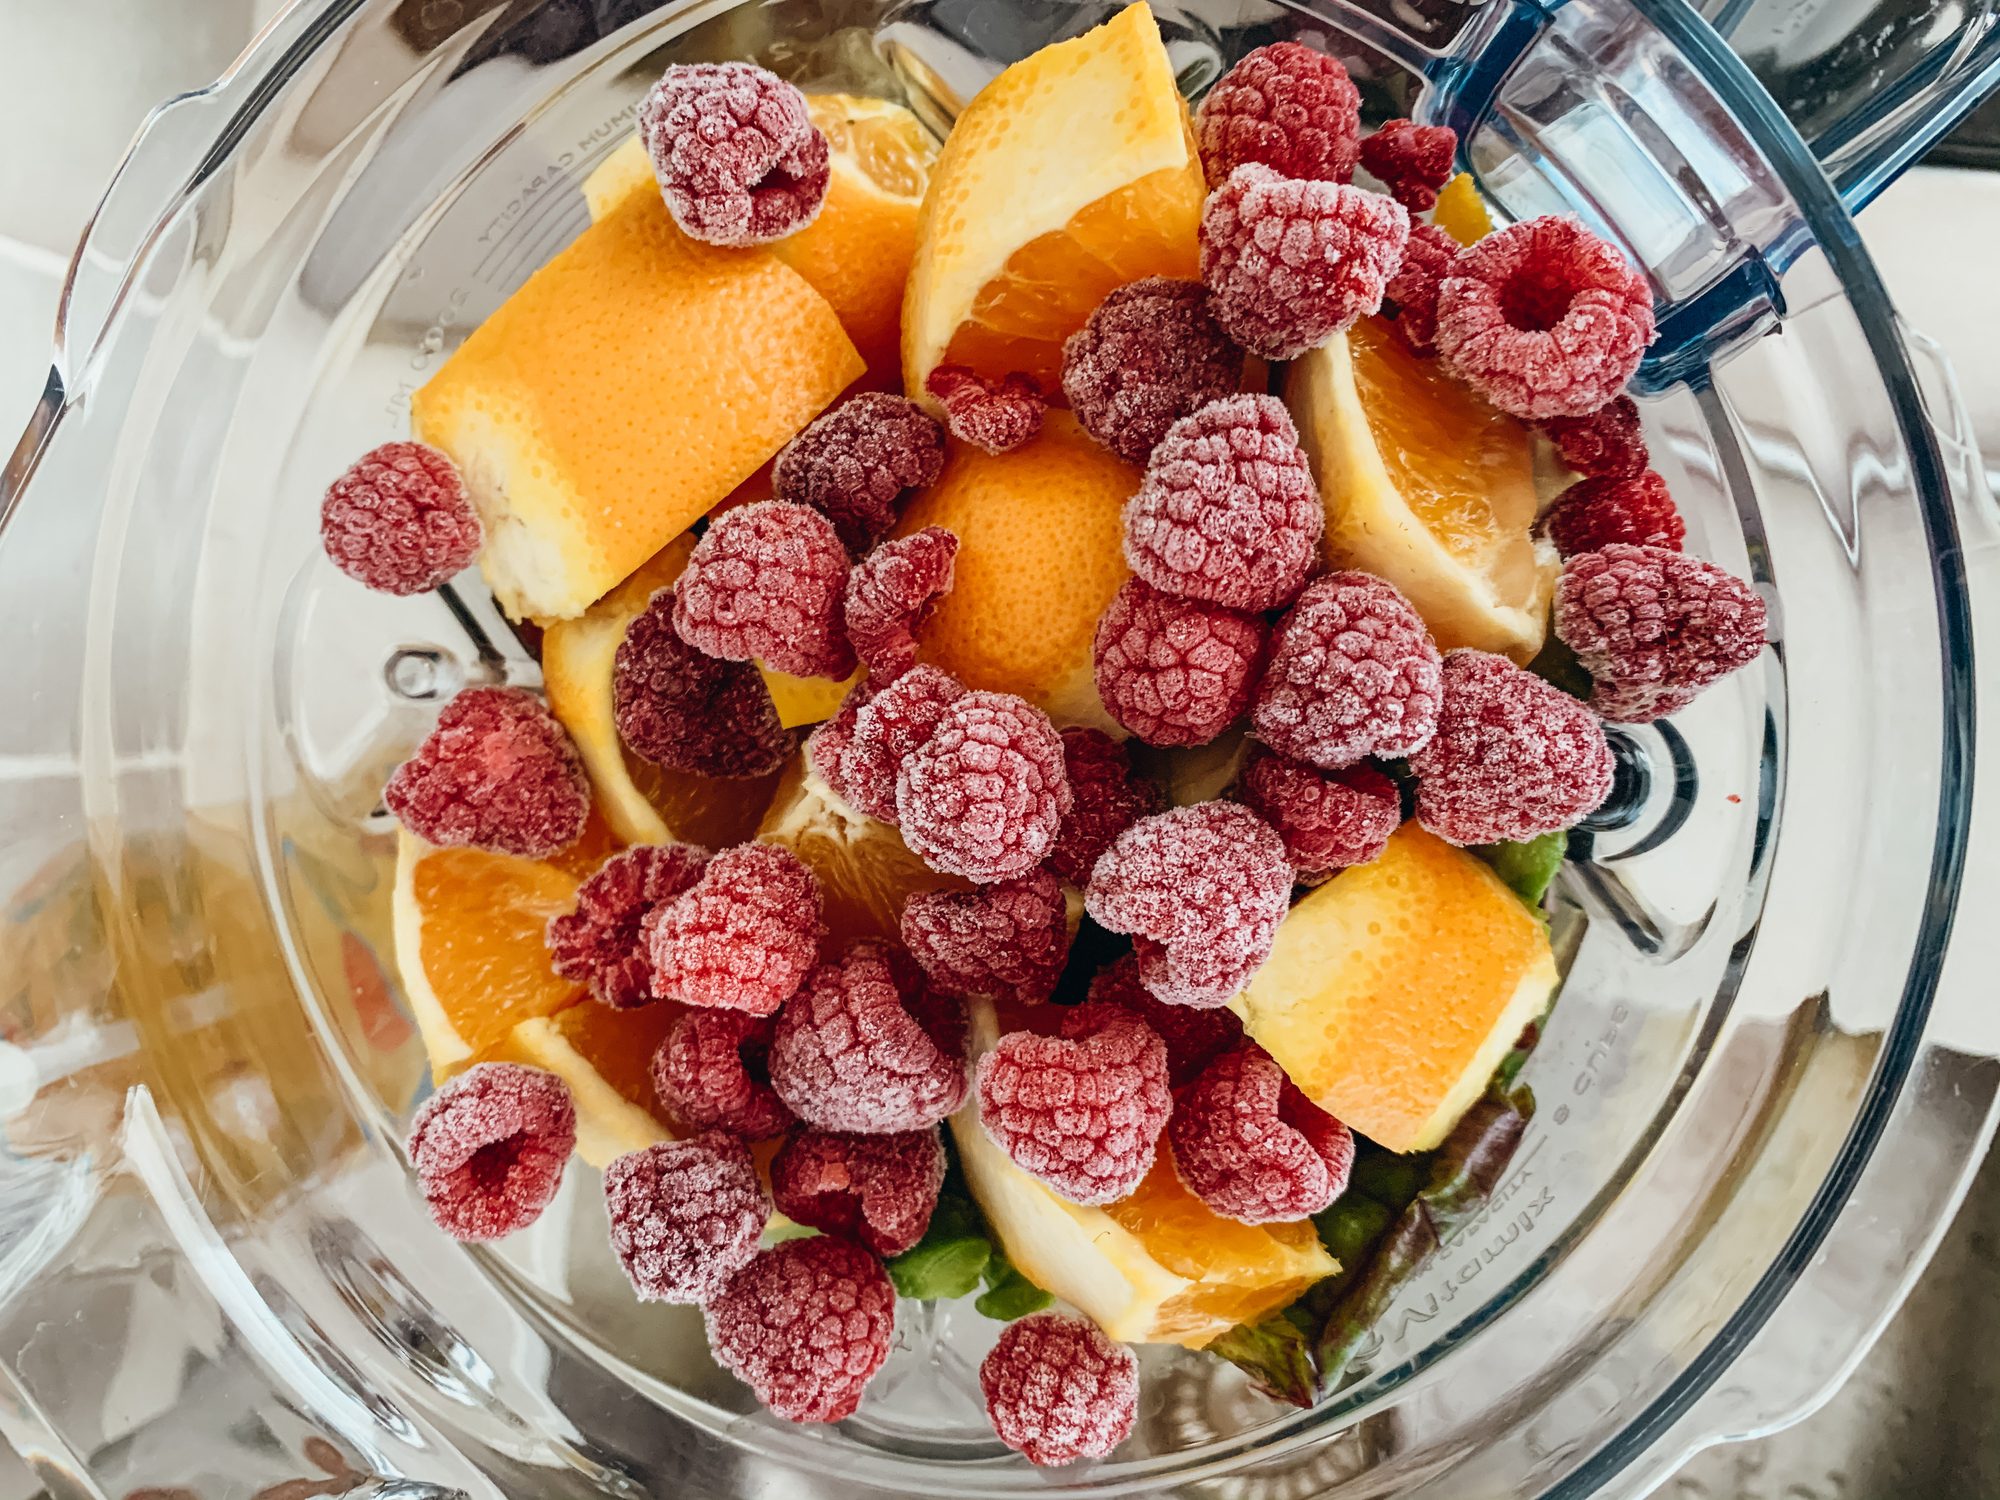 Oranges and Raspberries in Green Smoothie